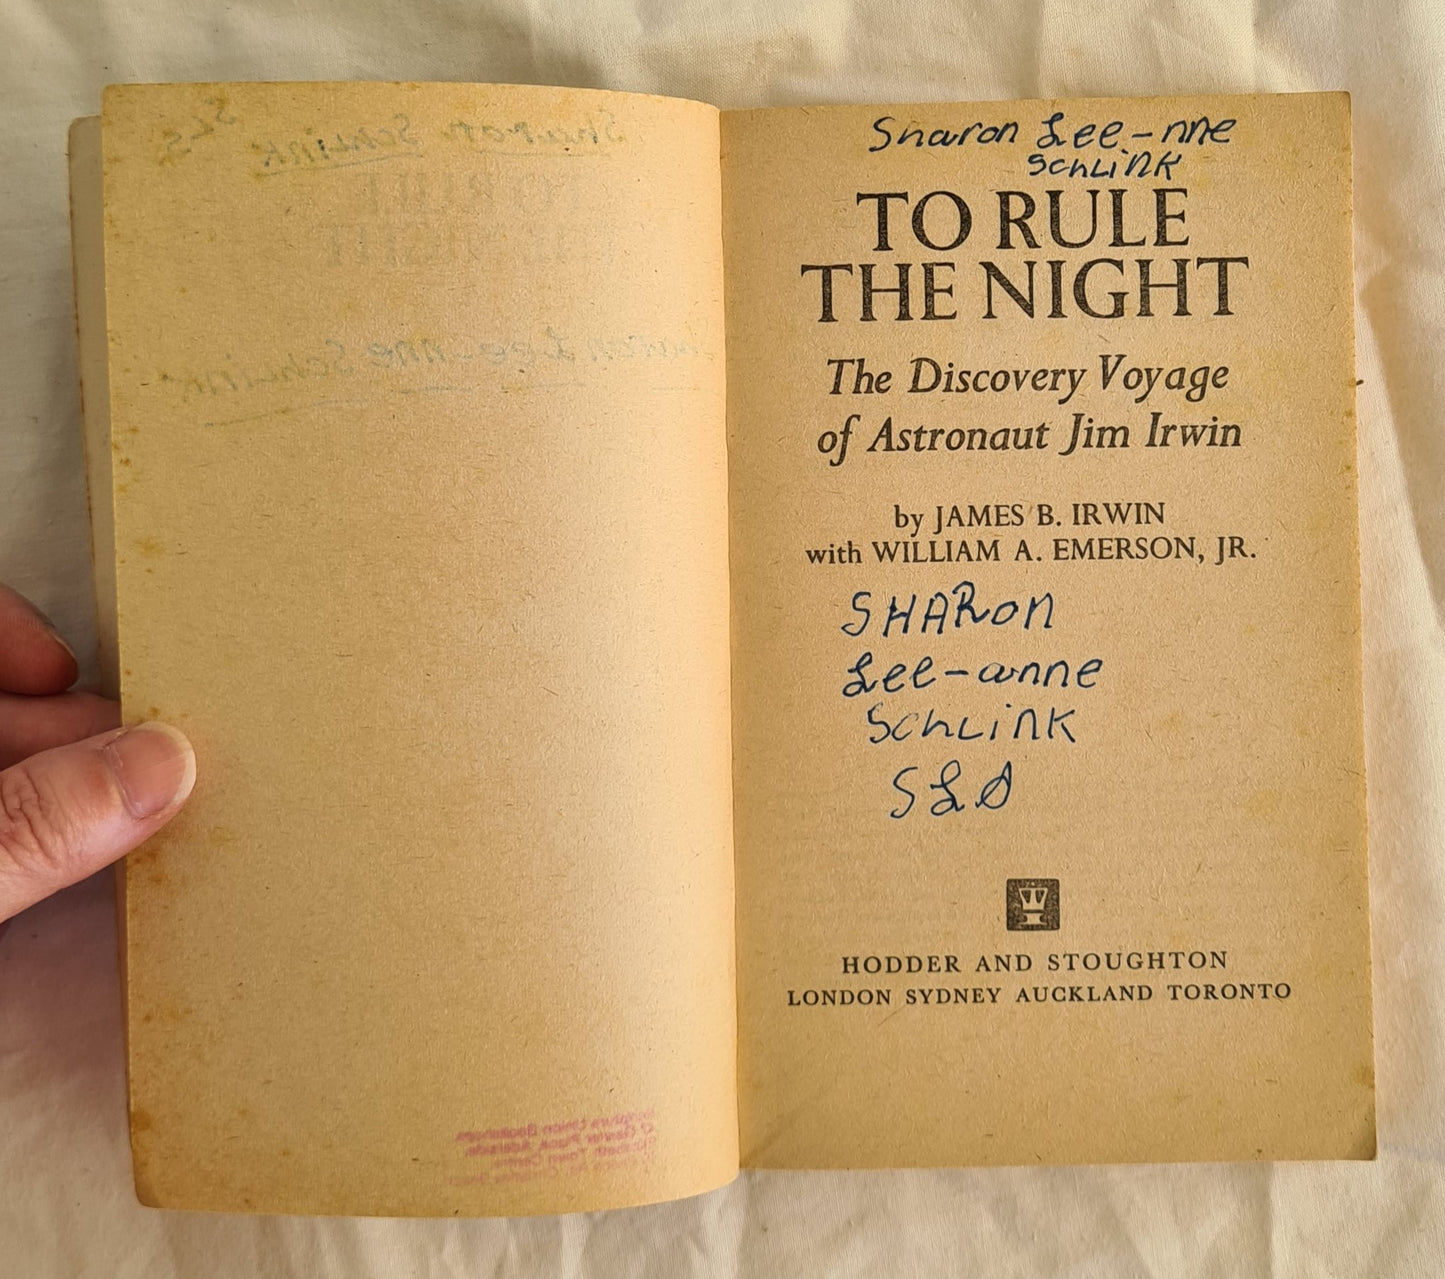 To Rule the Night by James B. Irwin with William A. Emerson, JR.